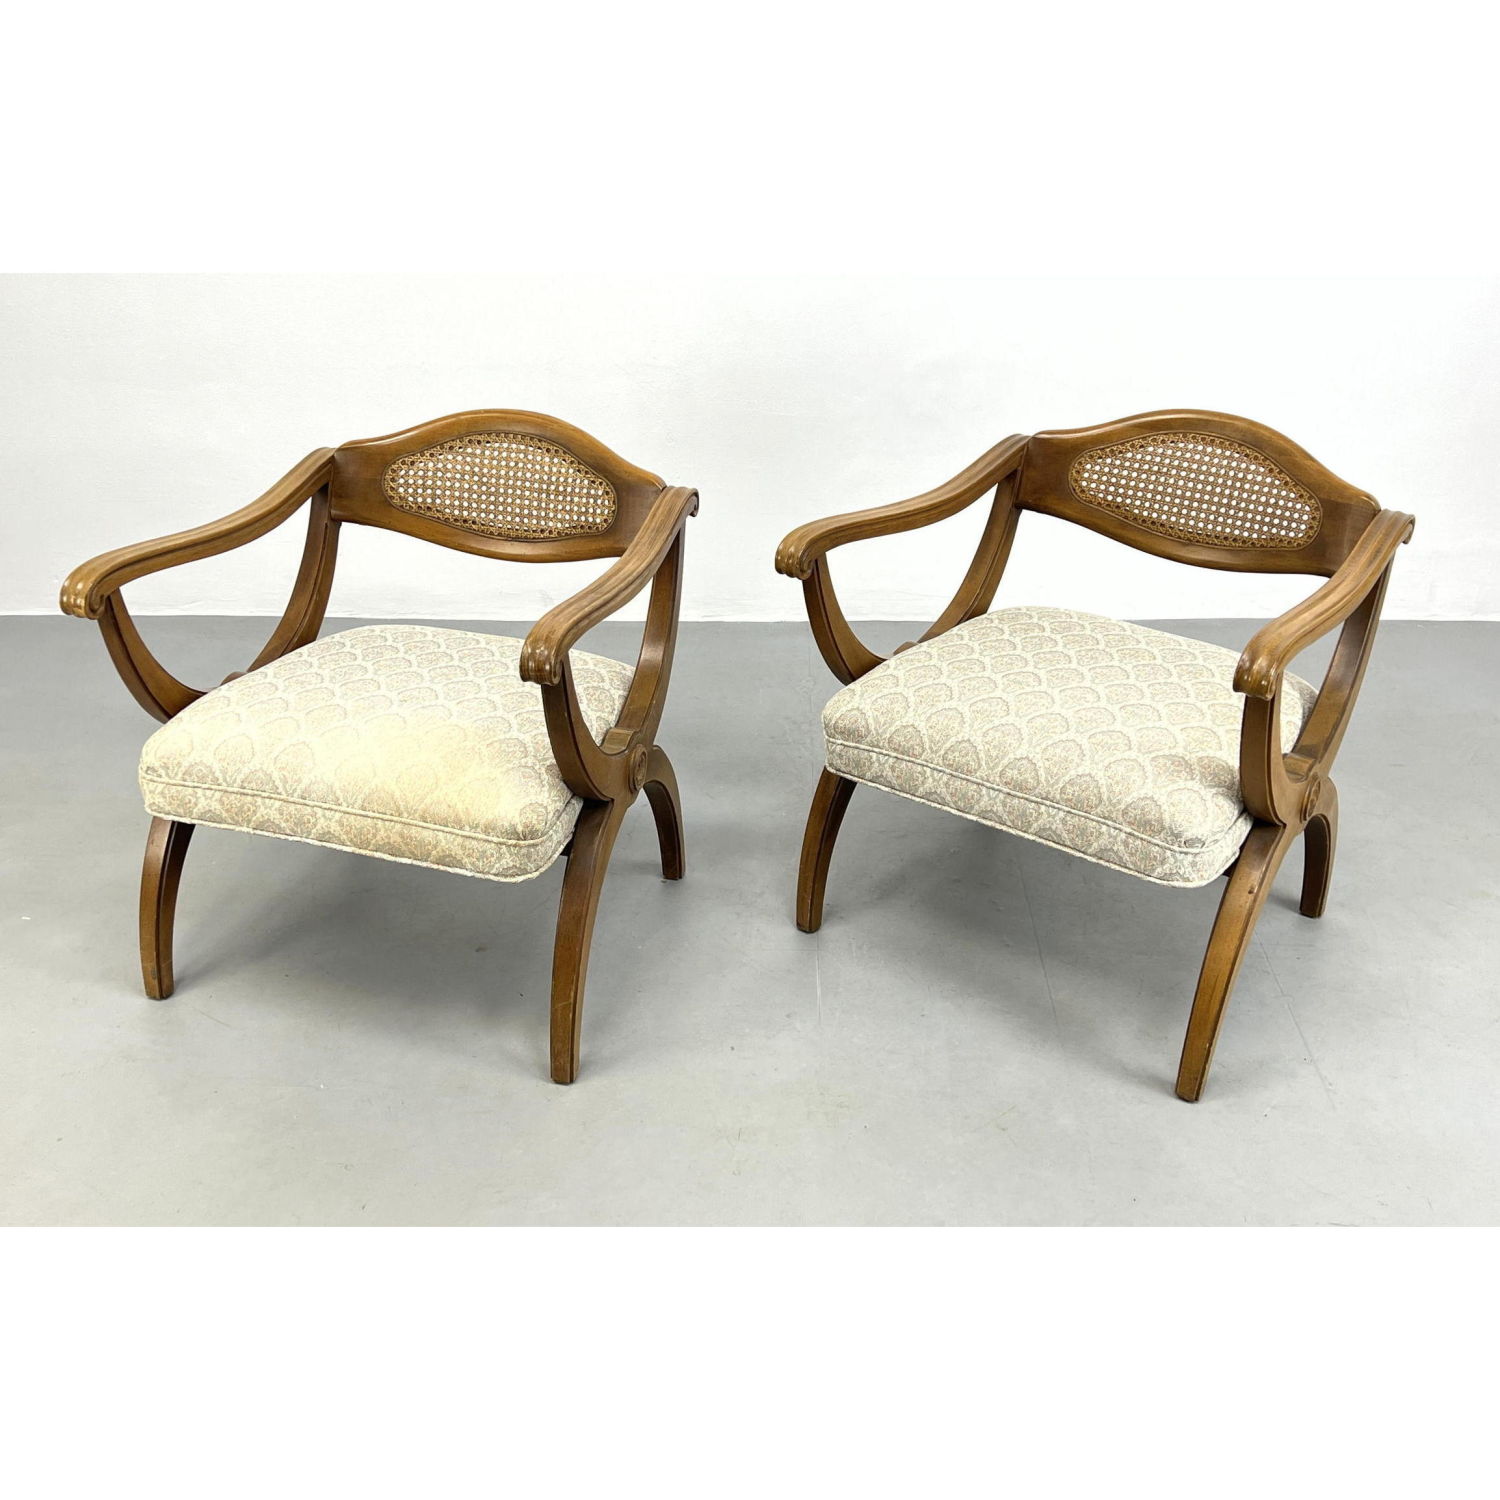 Pr Caned Back Open Arm Lounge Chairs.